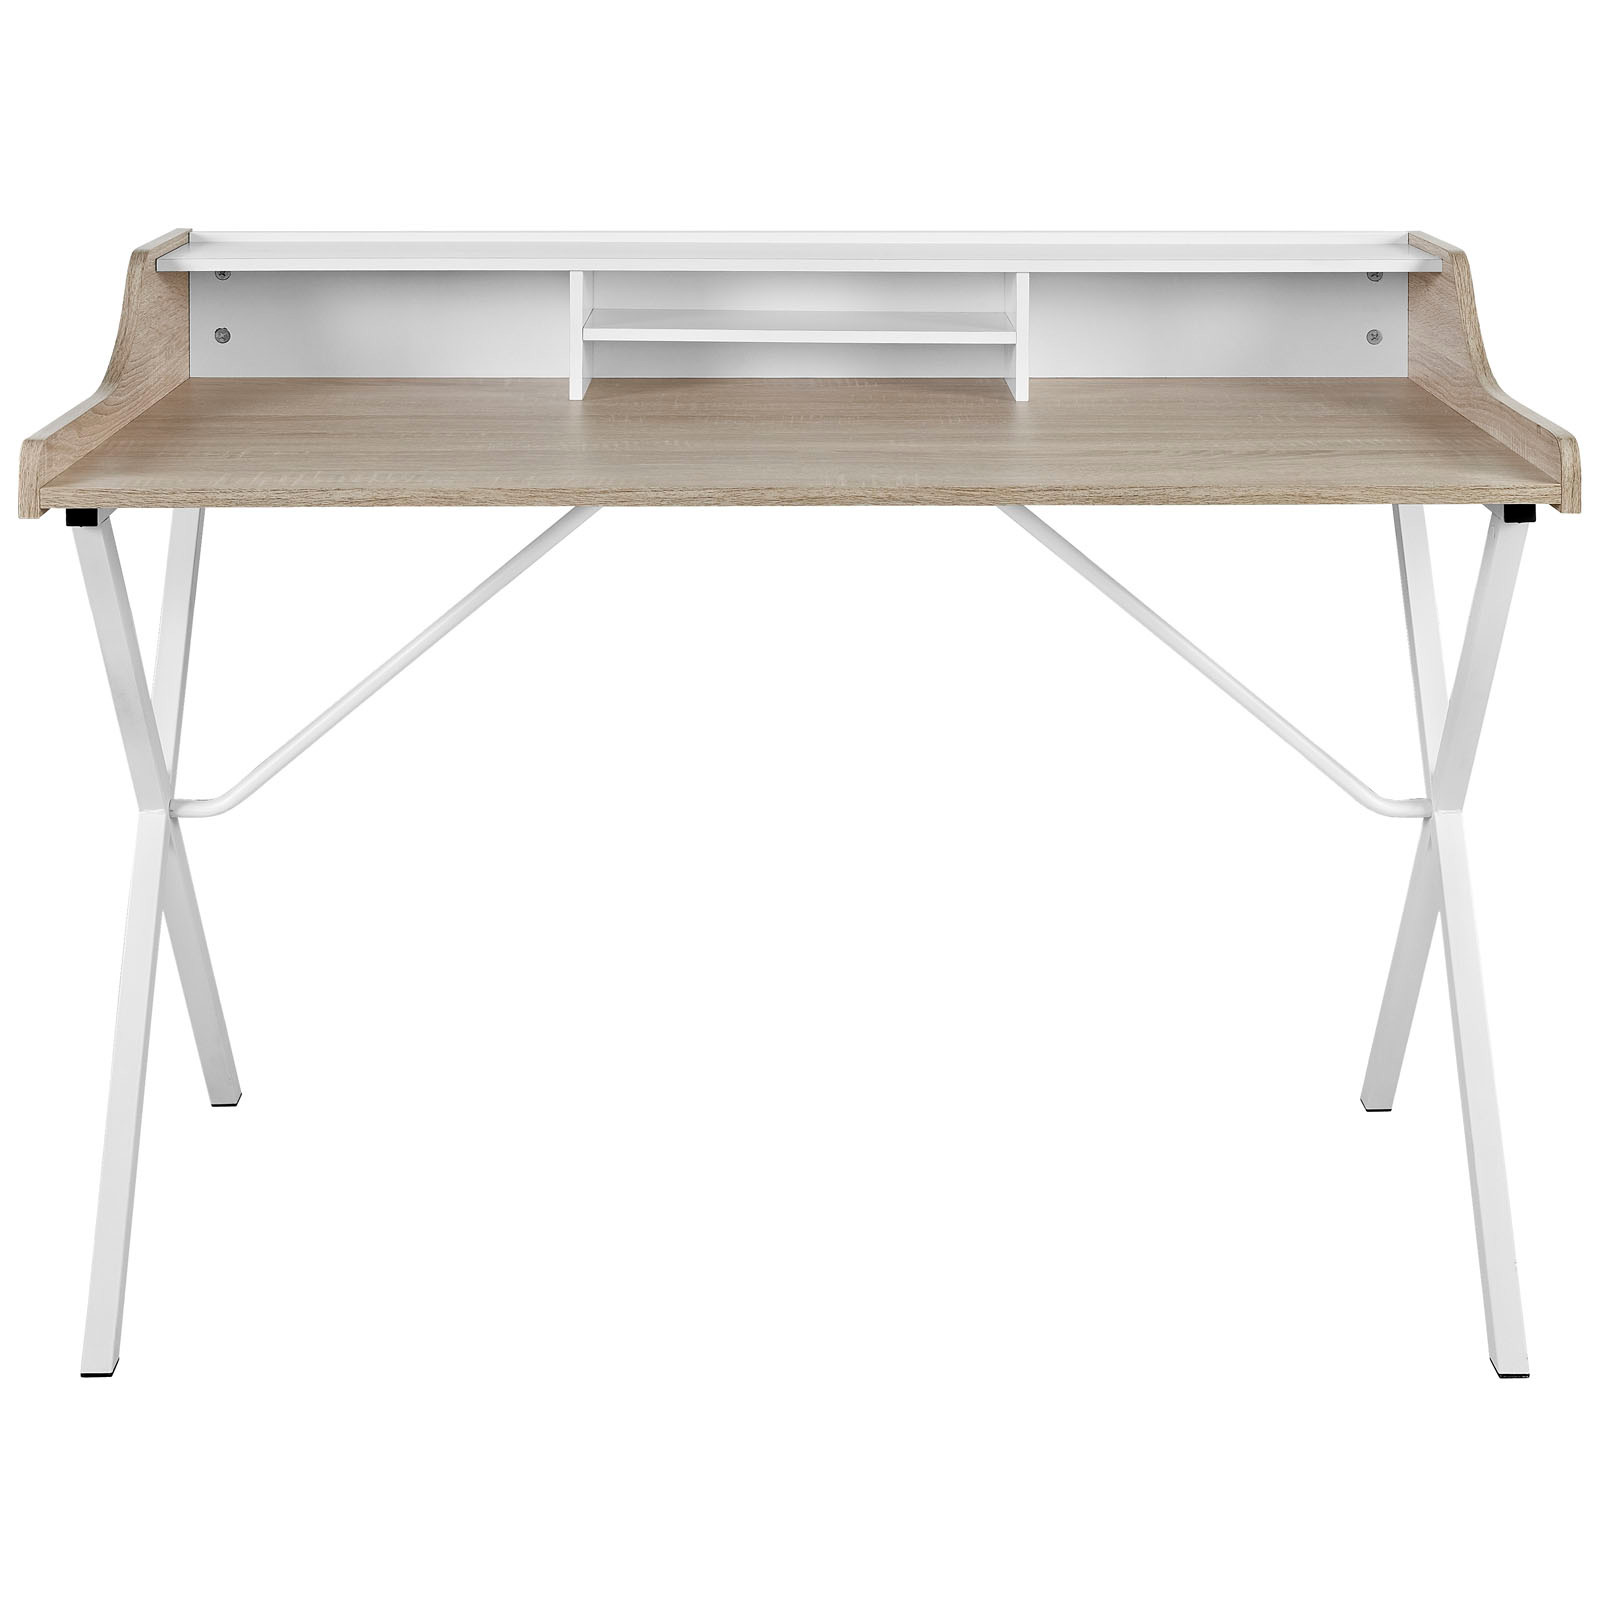 Space saving desk from Modway - Front View - Shown in Oak (Beige)